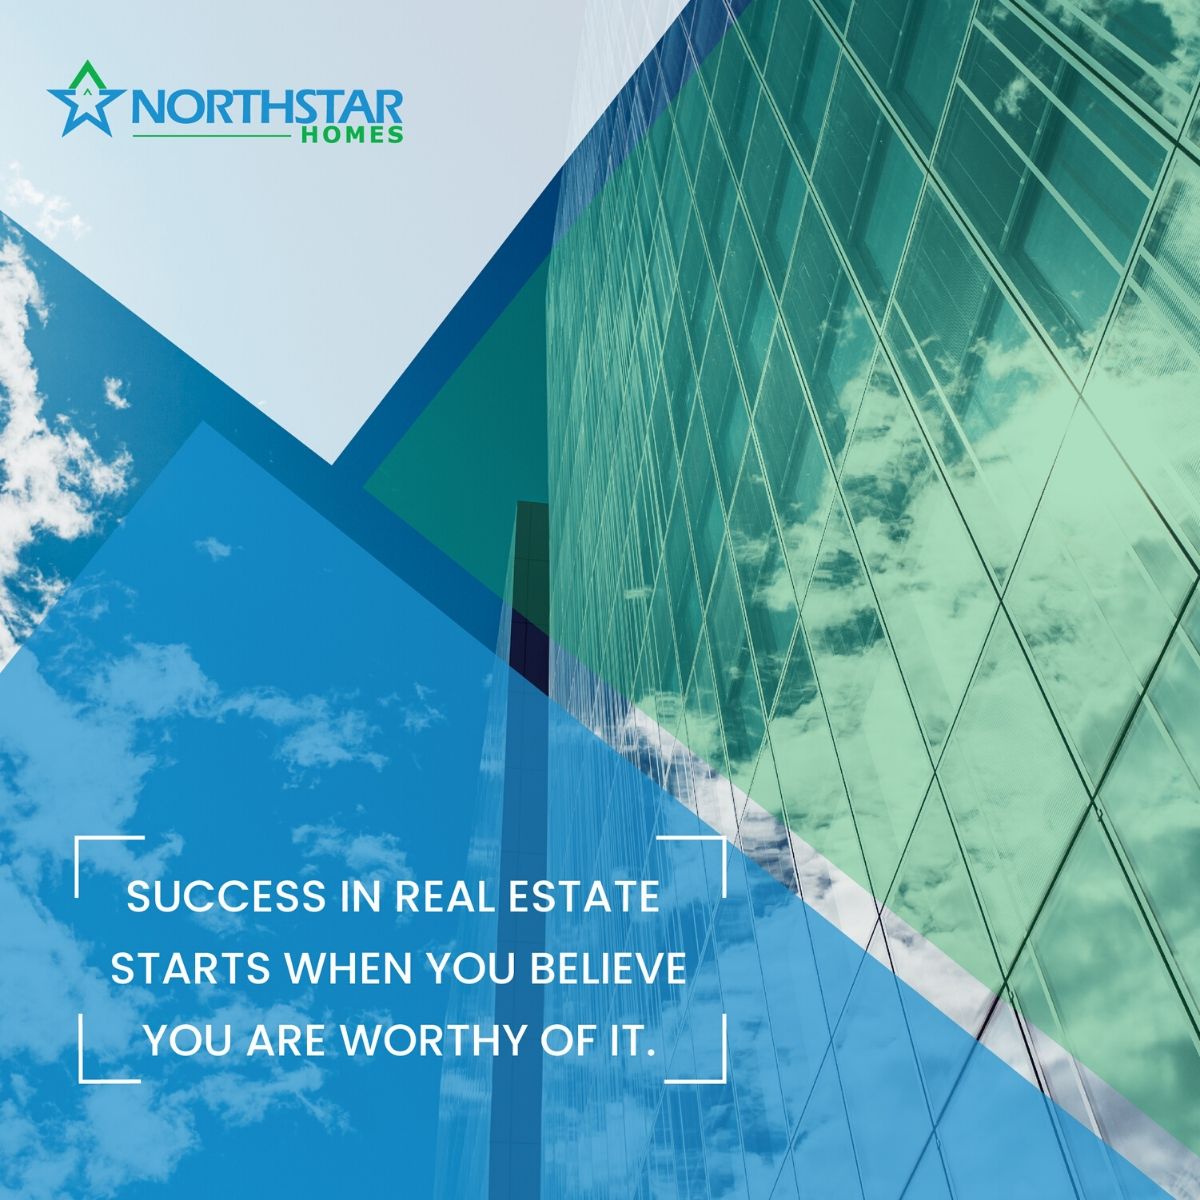 To be a #successfulinvestor in #realestate, the primary thing is to believe that #youareworthy of it. Talk to us to know more about #realestateinvestment  Call 9989933366
Click to know more: bit.ly/35HaKt4

#success #successinrealestate  #investment #investinrealestate